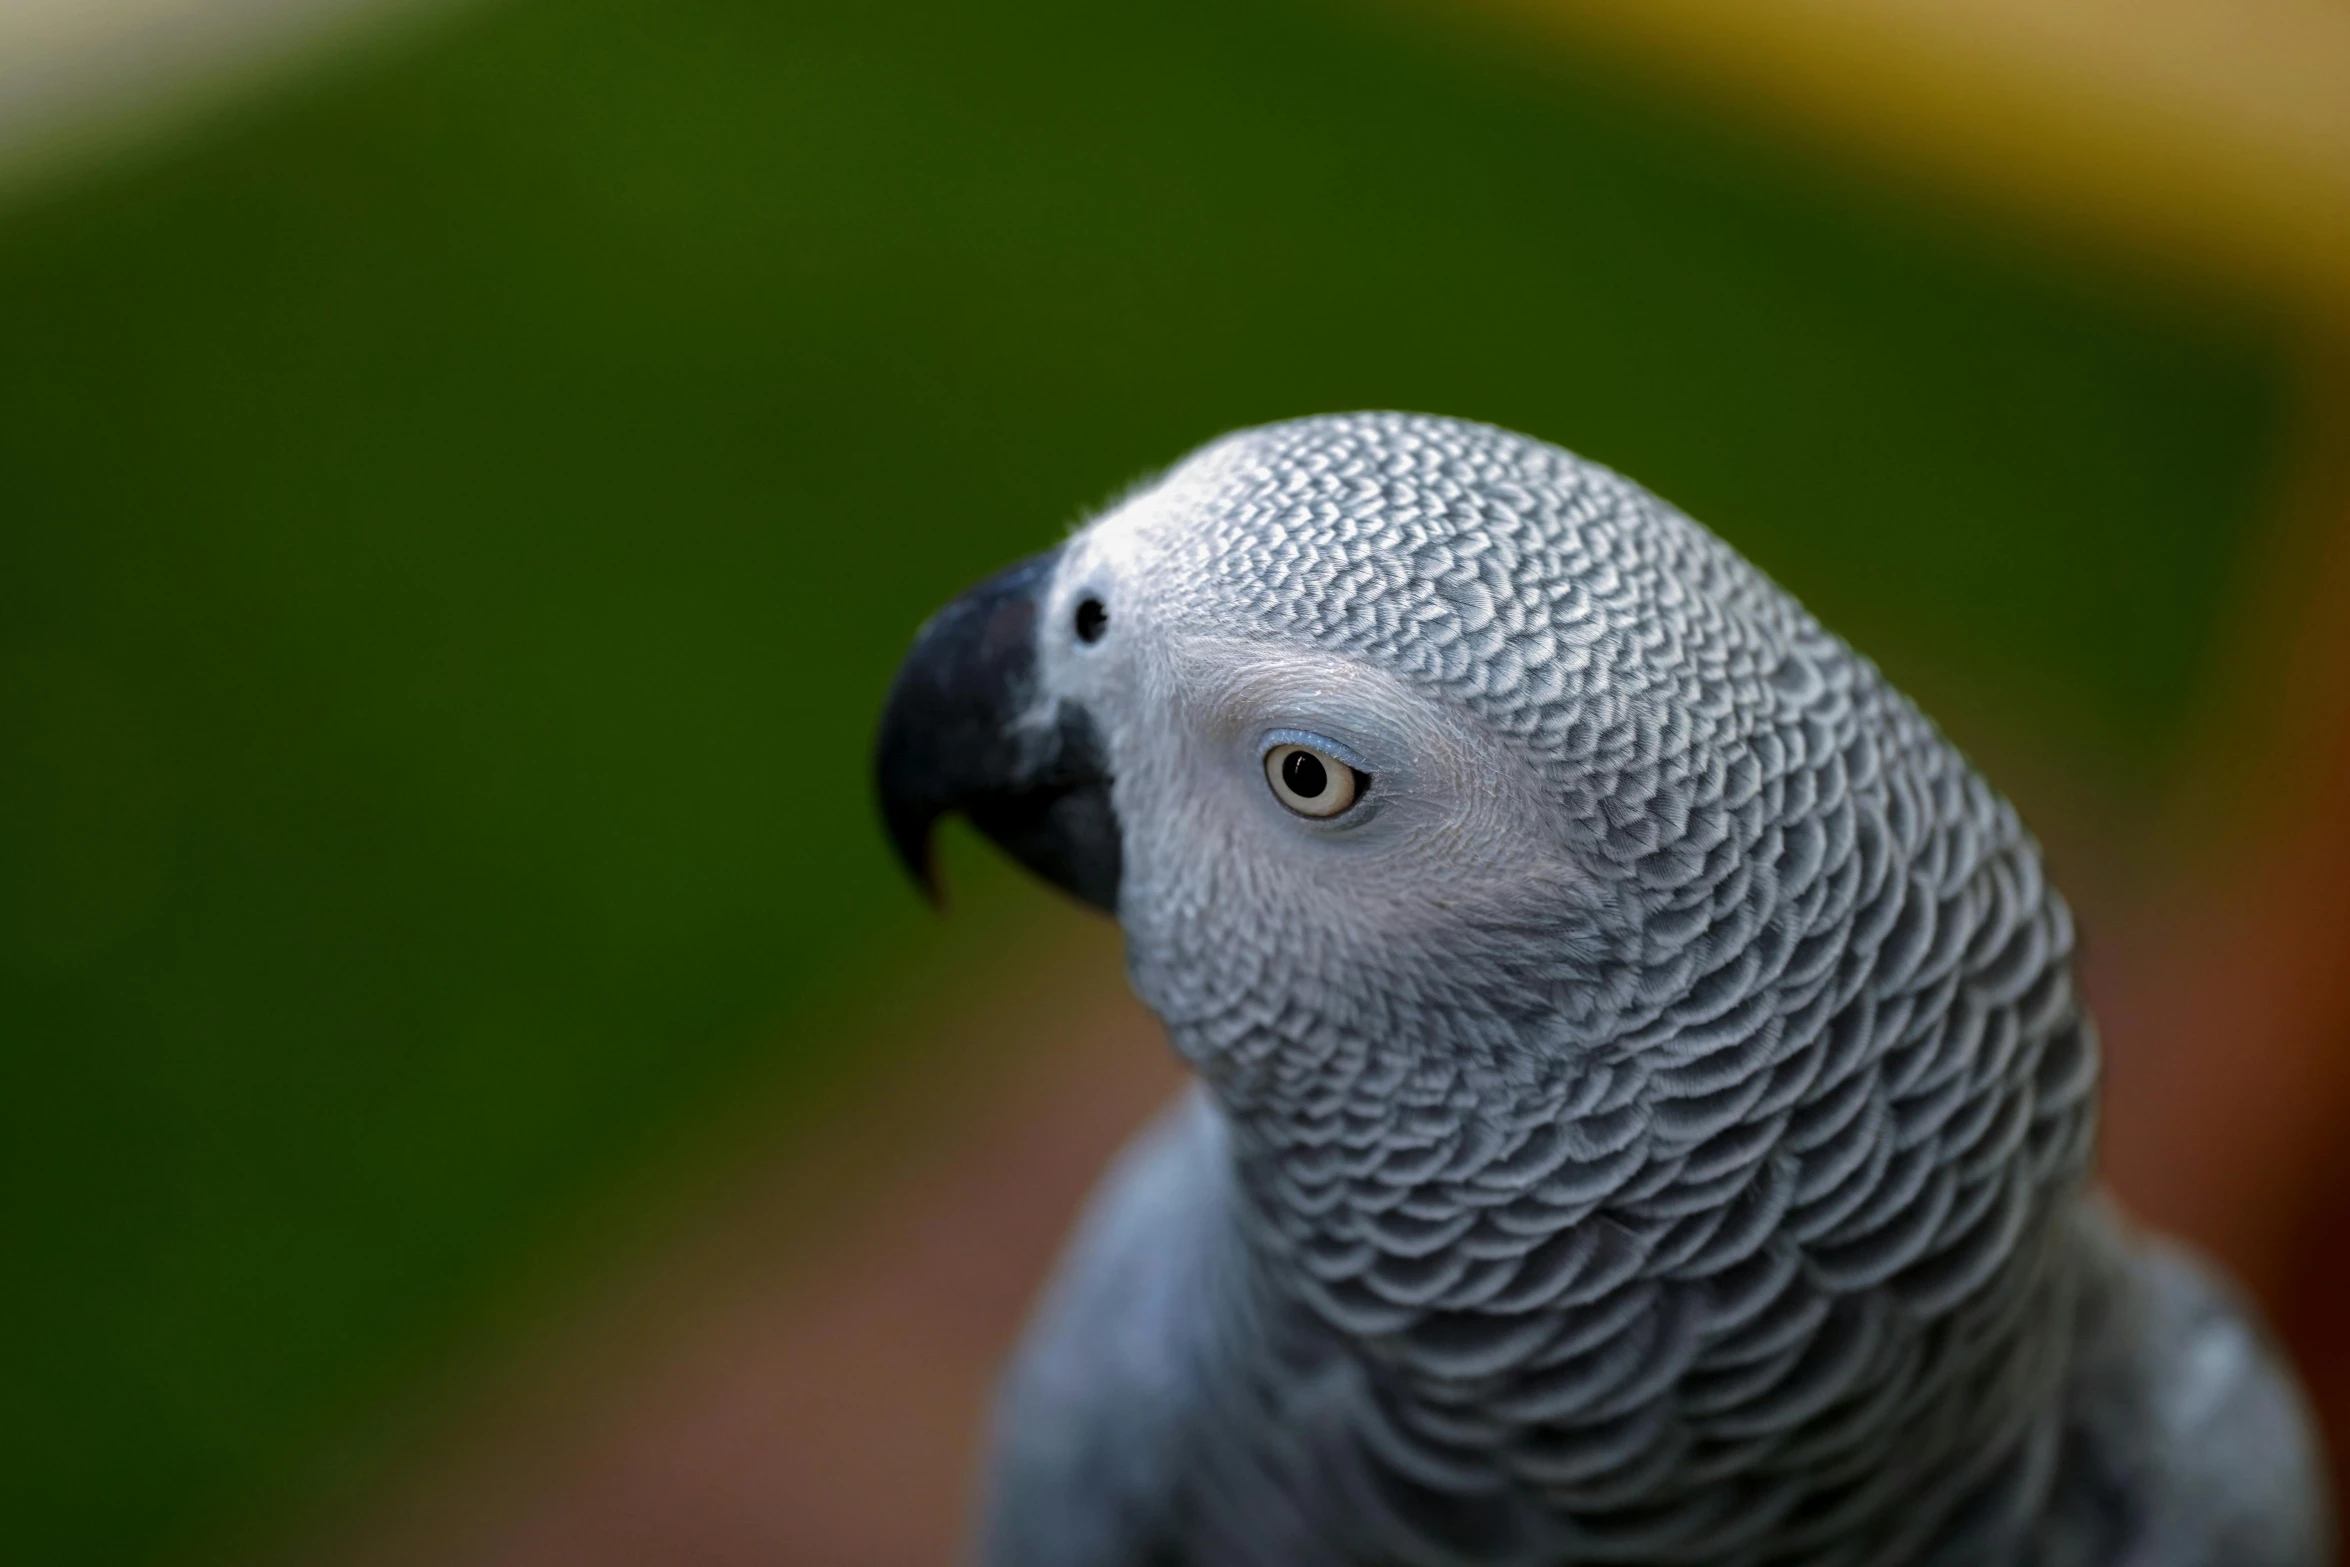 a close up of the face of a grey parrot